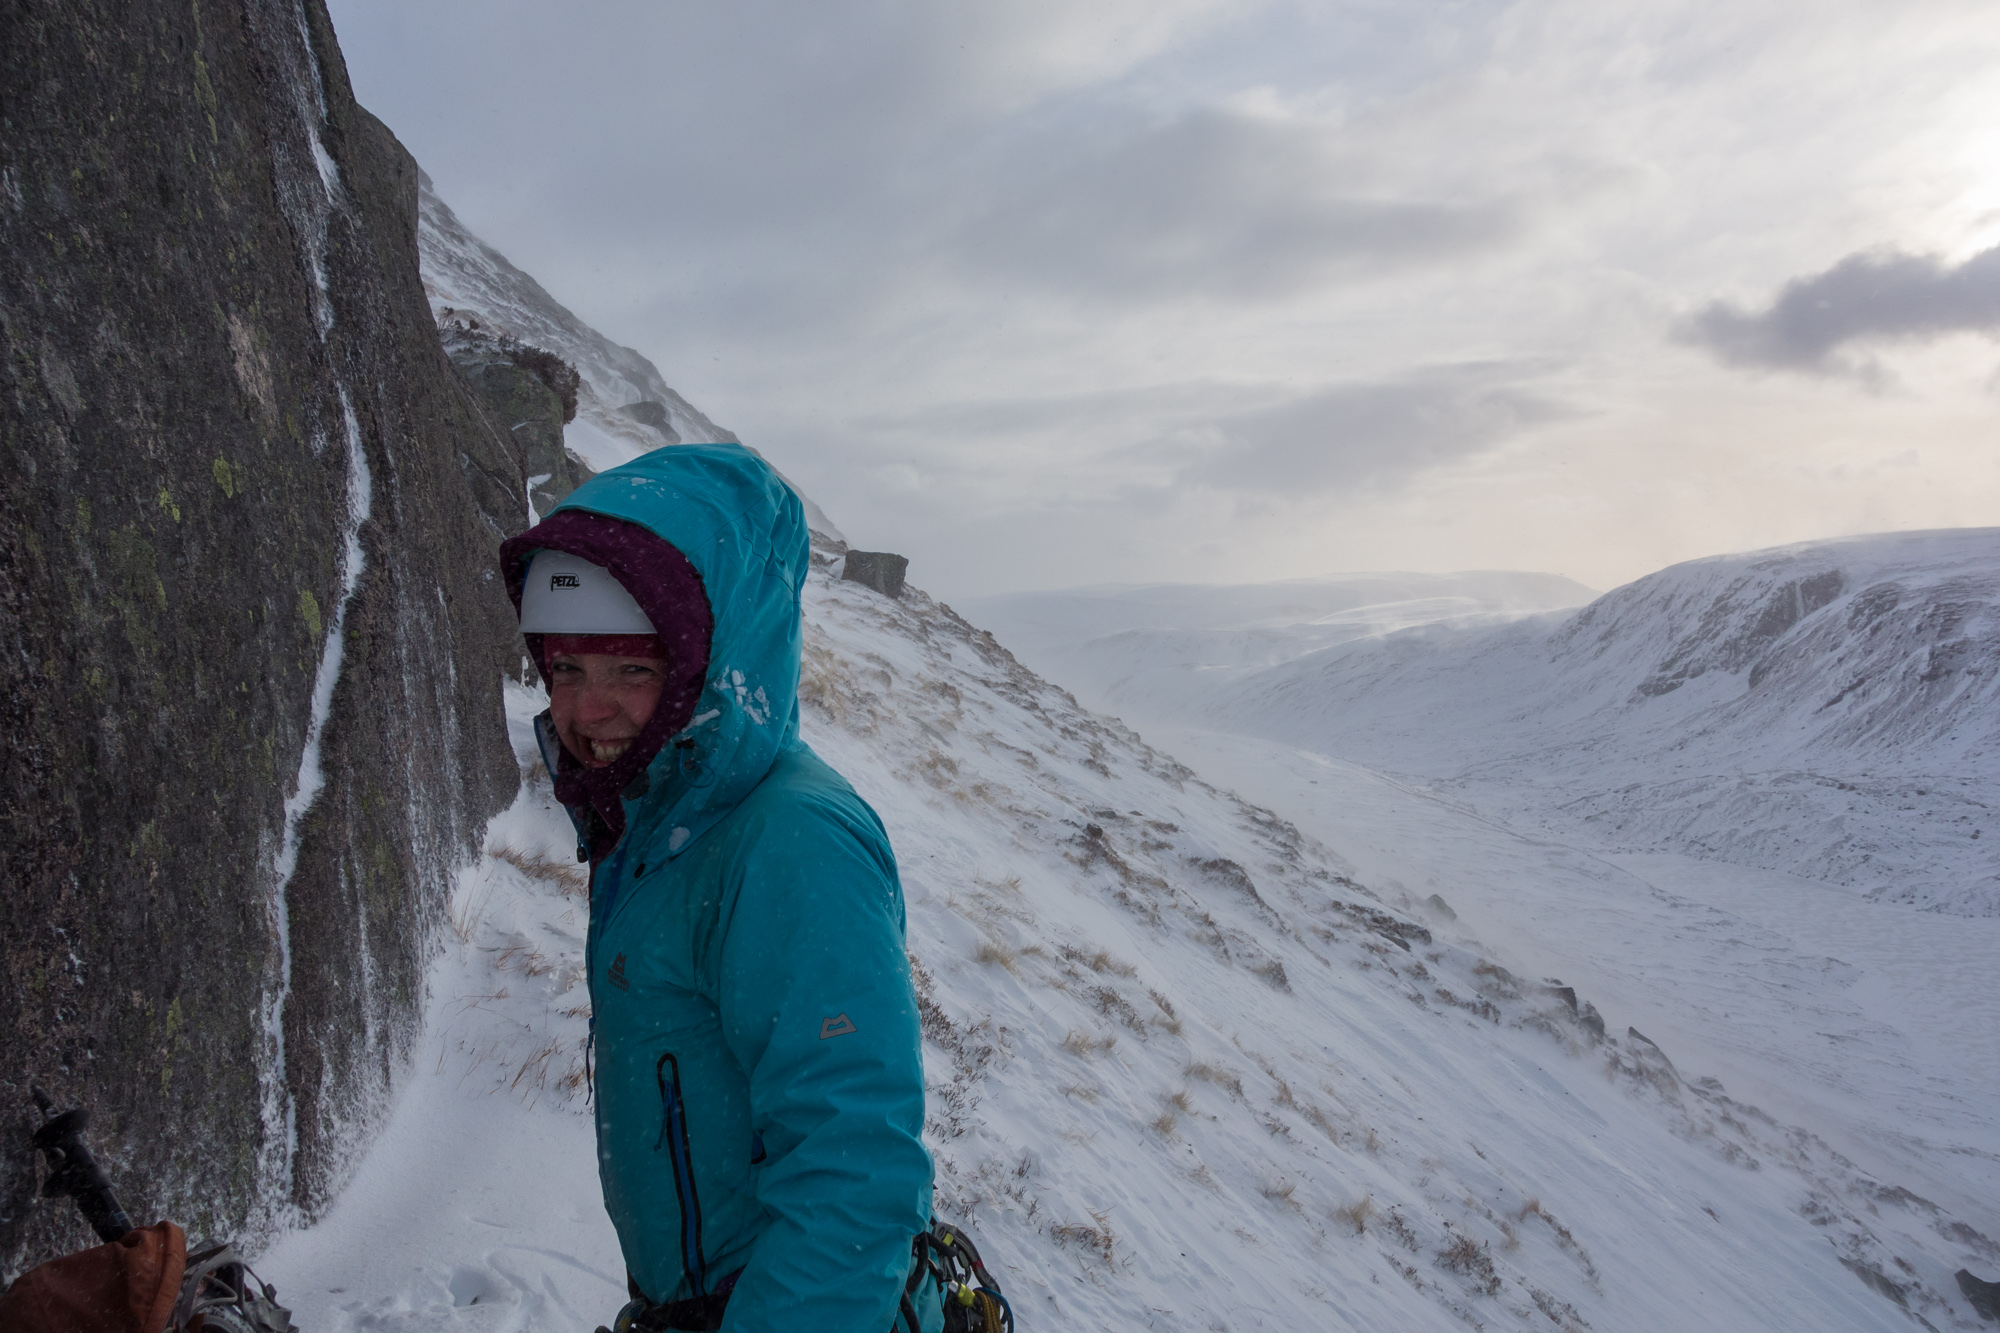 scottish winter ice climbing on the drool eagles rock cairngorms